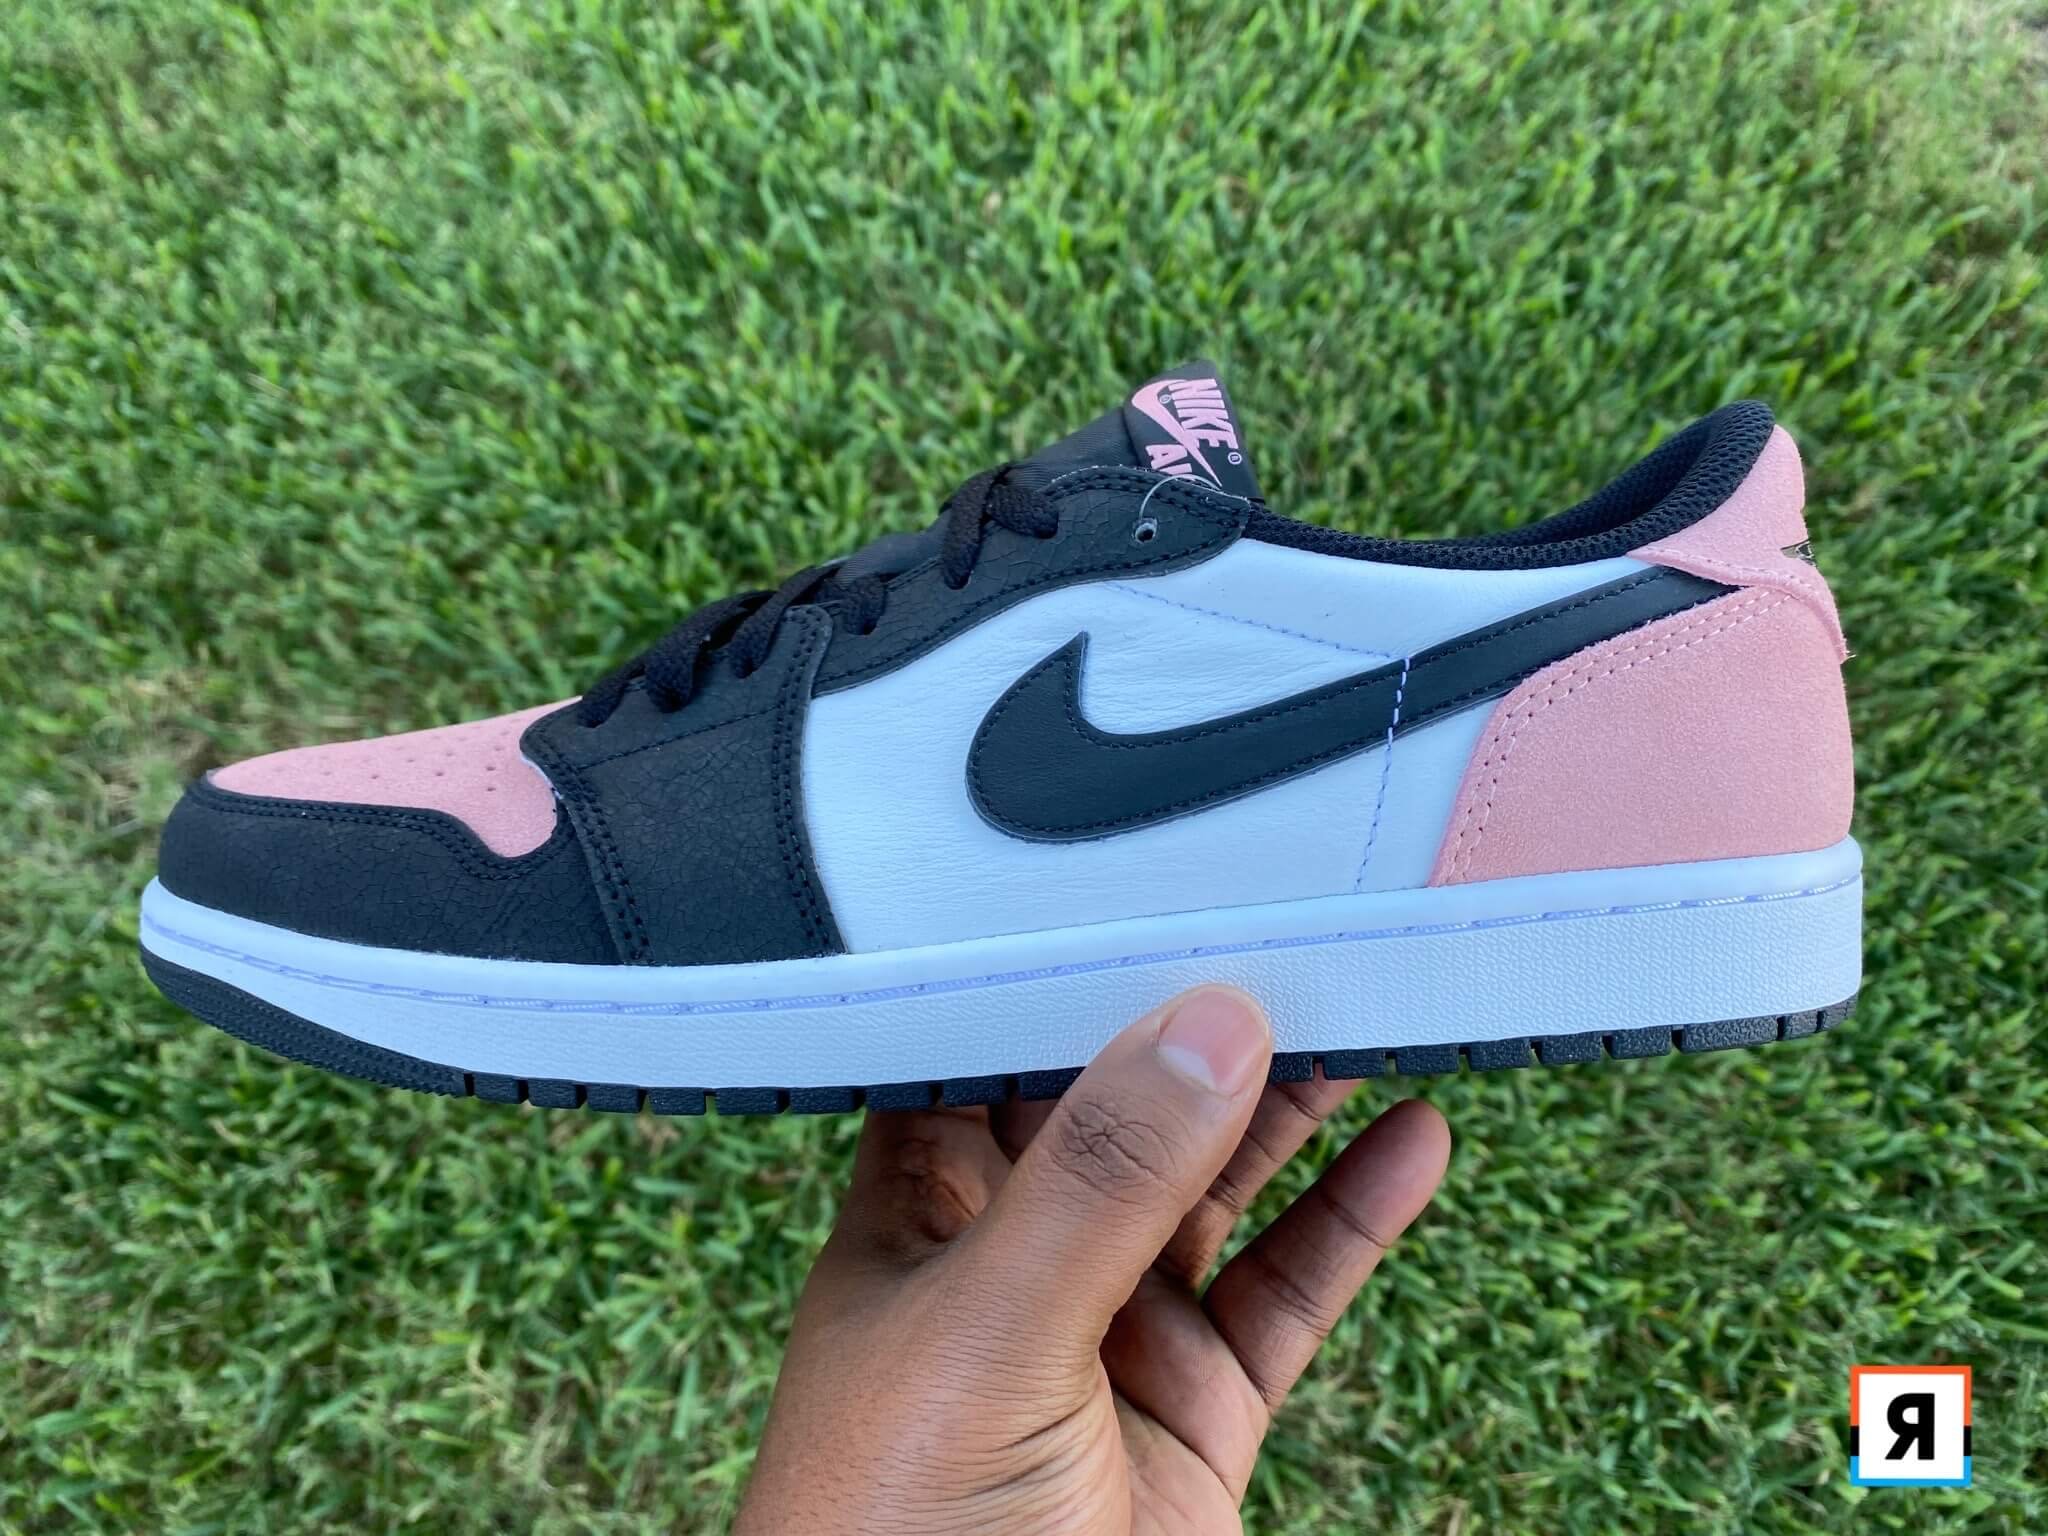 Air Jordan 1 Low OG “Bleached Coral” | [Detailed Review] | The